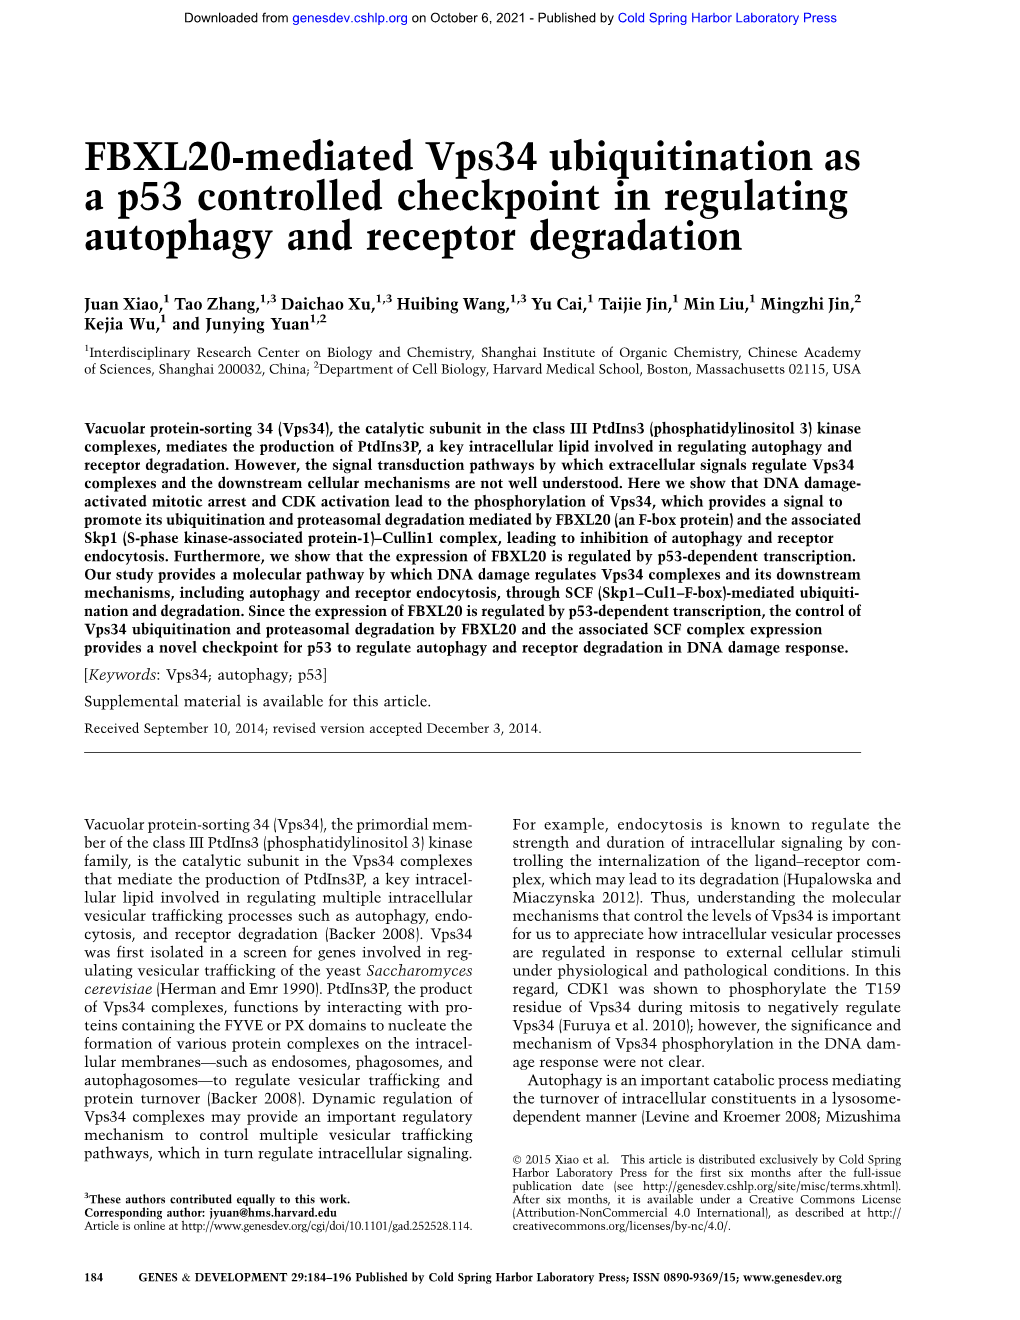 FBXL20-Mediated Vps34 Ubiquitination As a P53 Controlled Checkpoint in Regulating Autophagy and Receptor Degradation